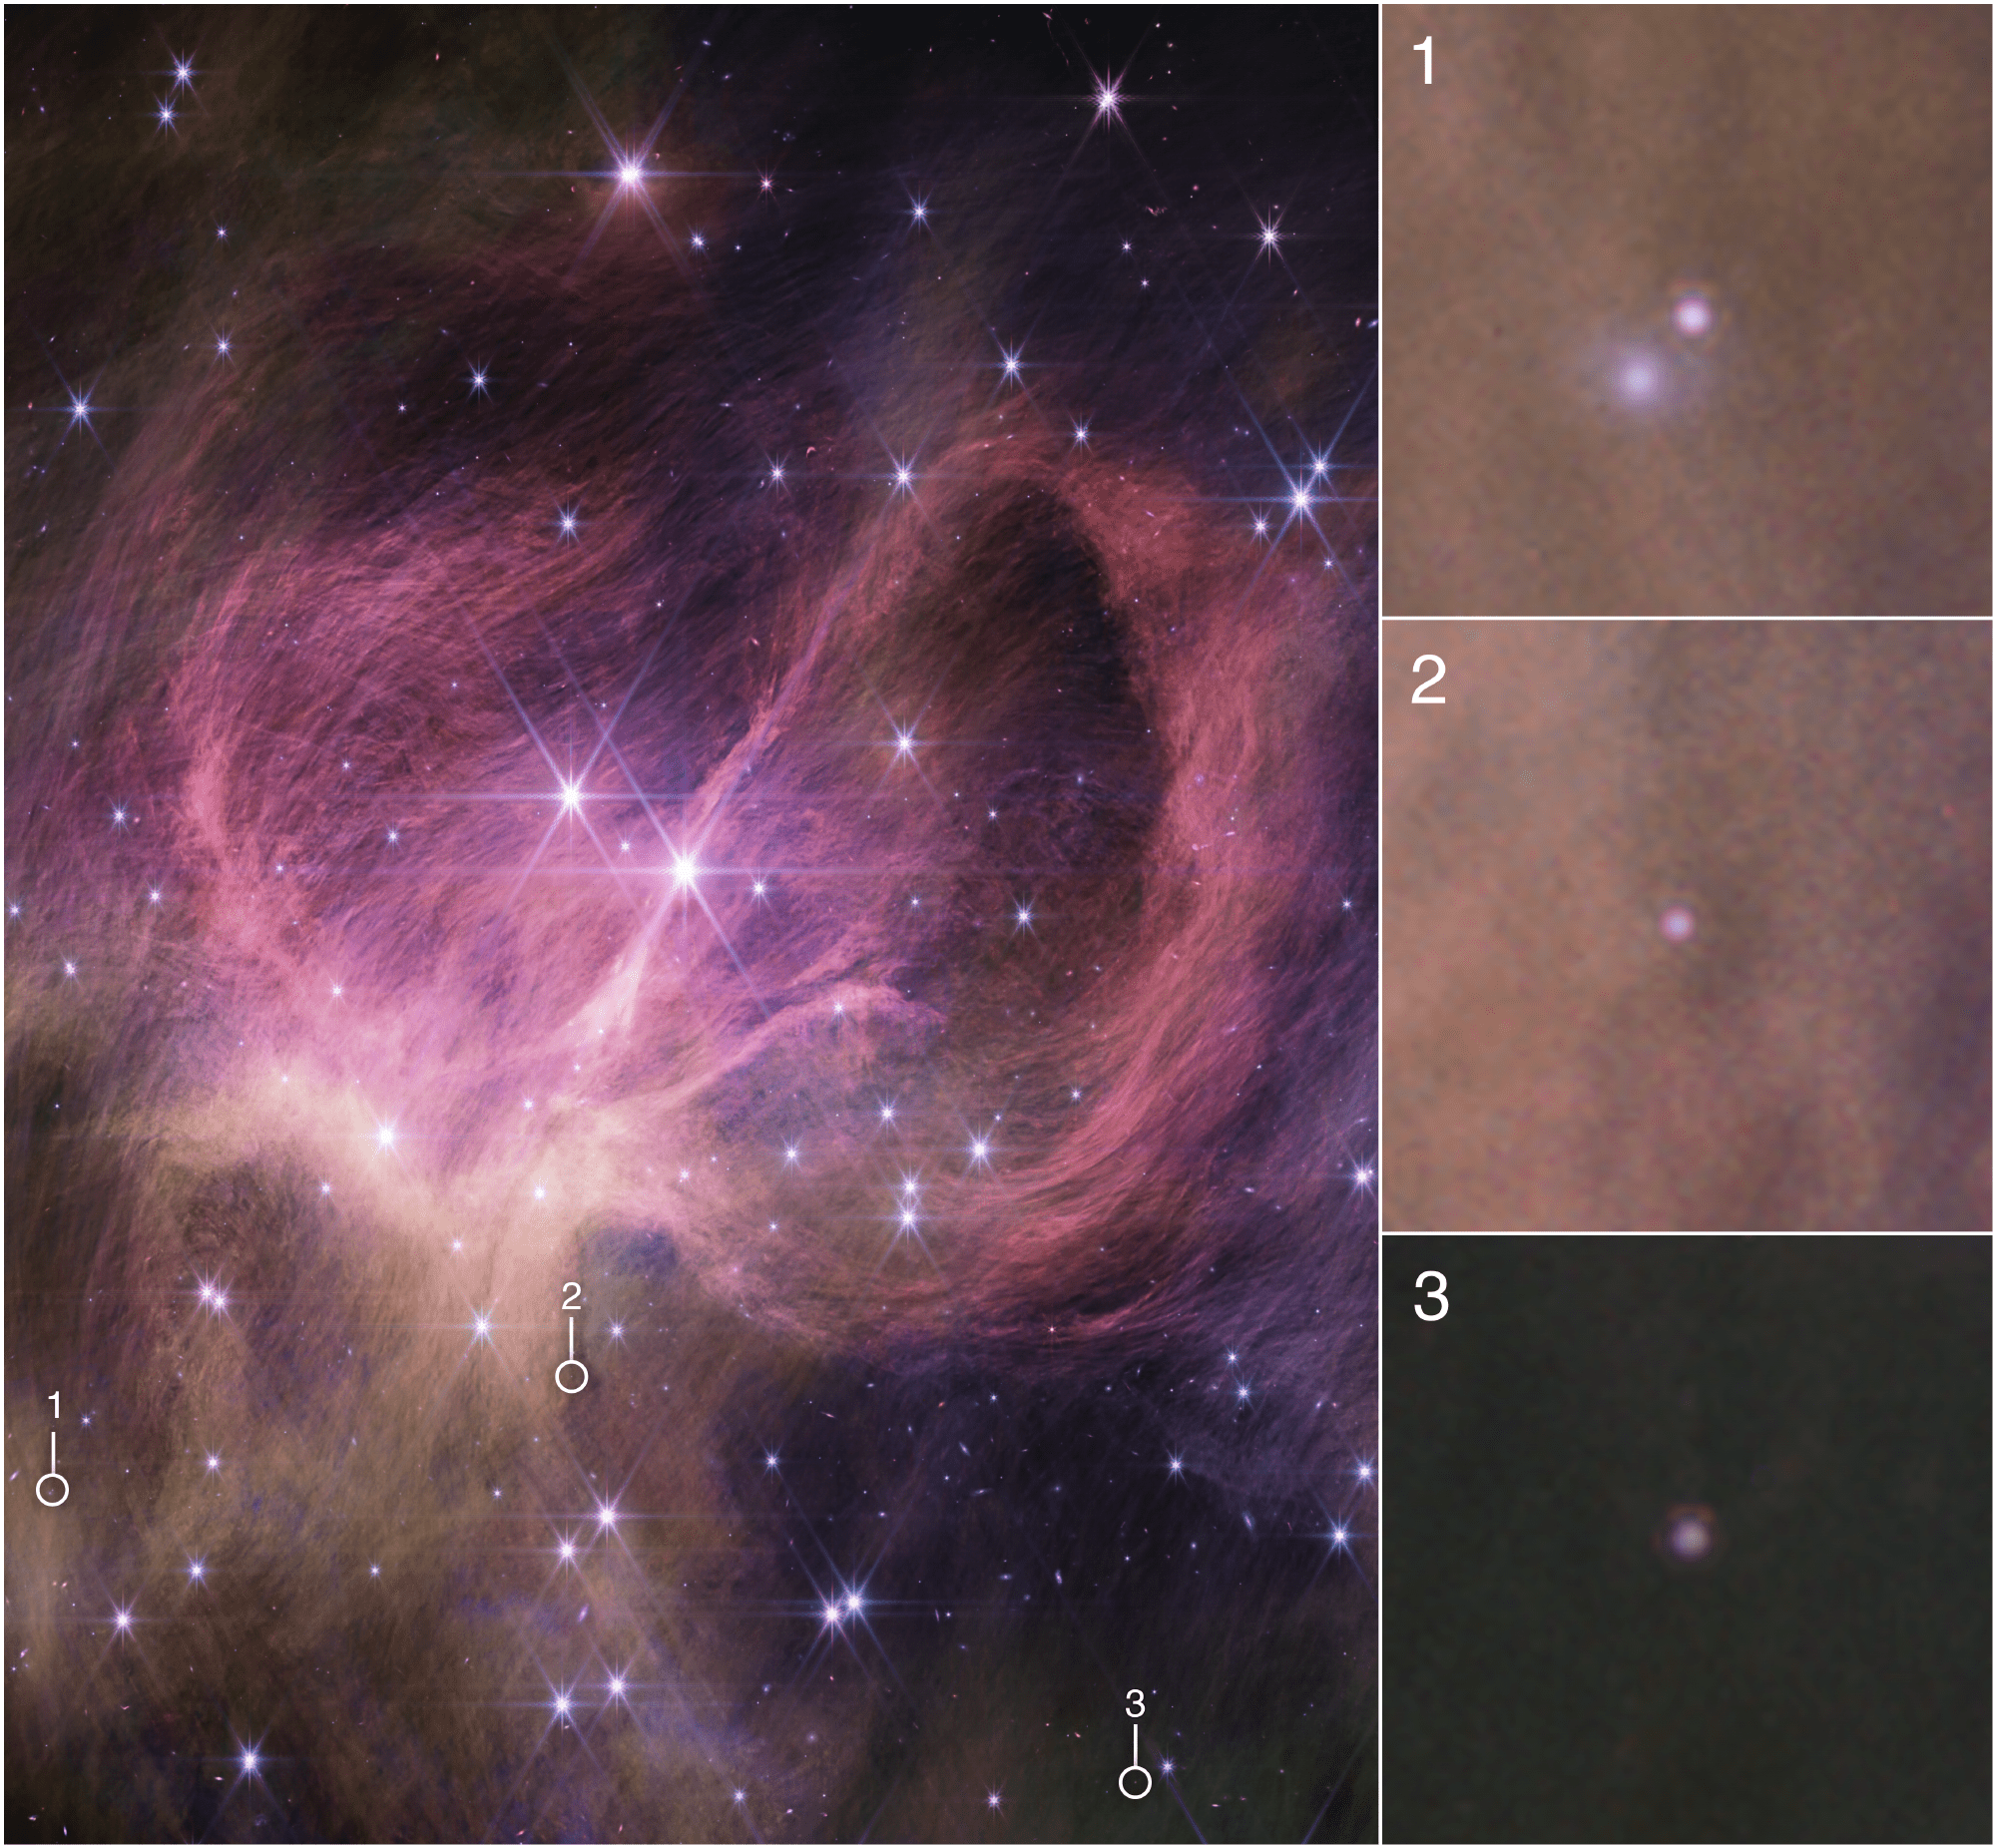 Image of wispy pink-purple hair-like filaments and a scattering of stars, with three image details pulled out in square boxes stacked vertically along the right.